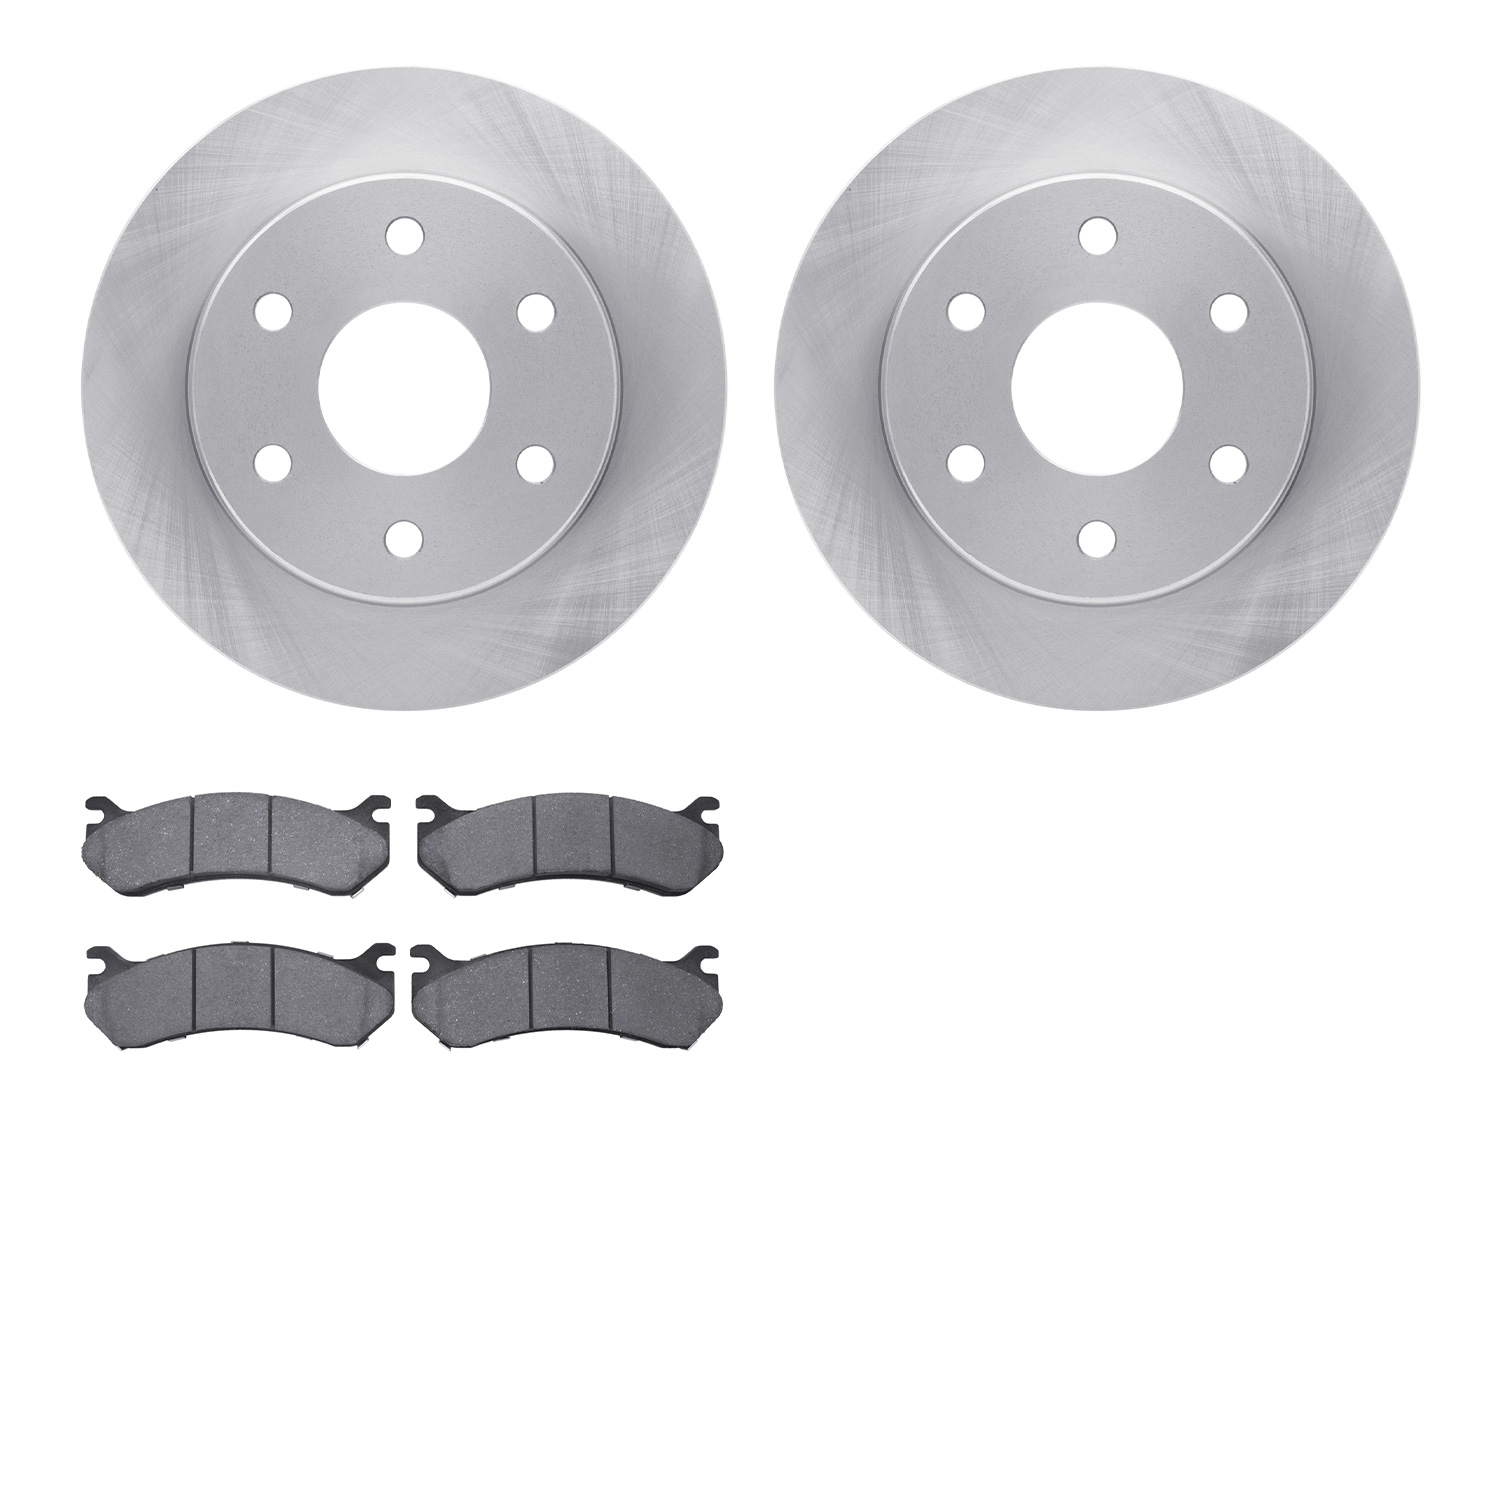 6402-48064 Brake Rotors with Ultimate-Duty Brake Pads, 1999-2008 GM, Position: Front